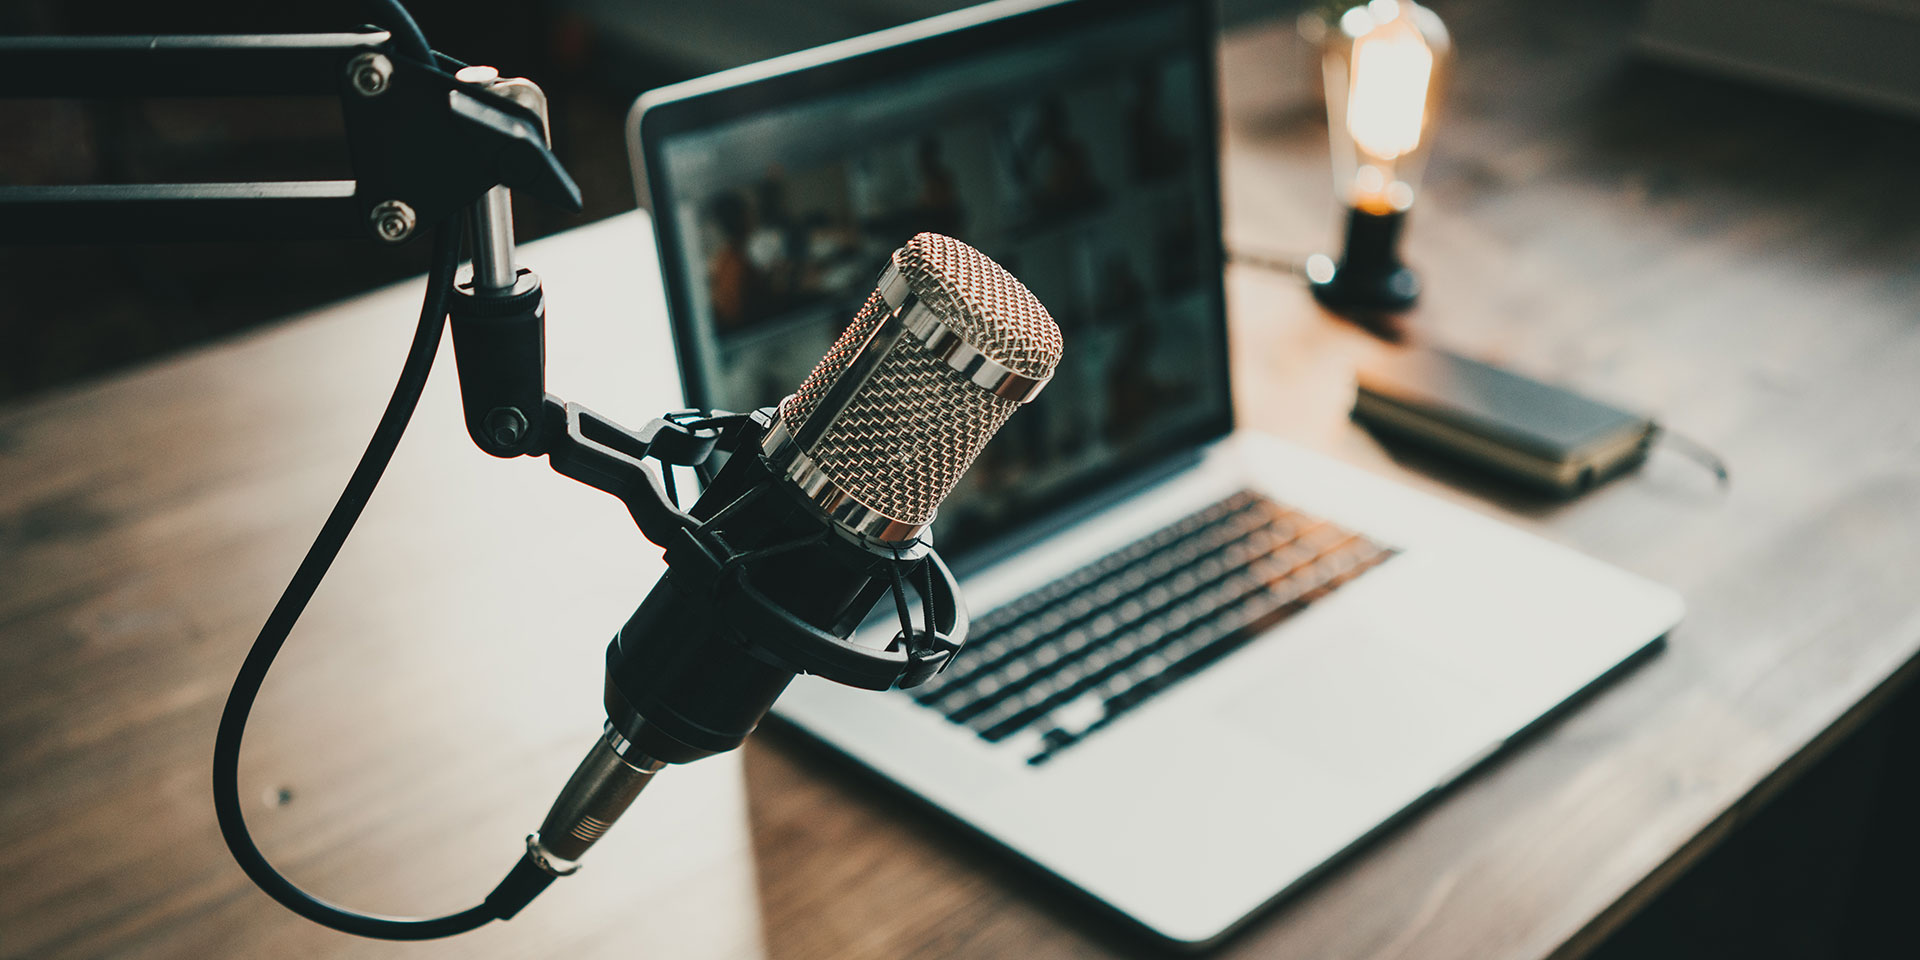 podcasting equipment on a wooden desk